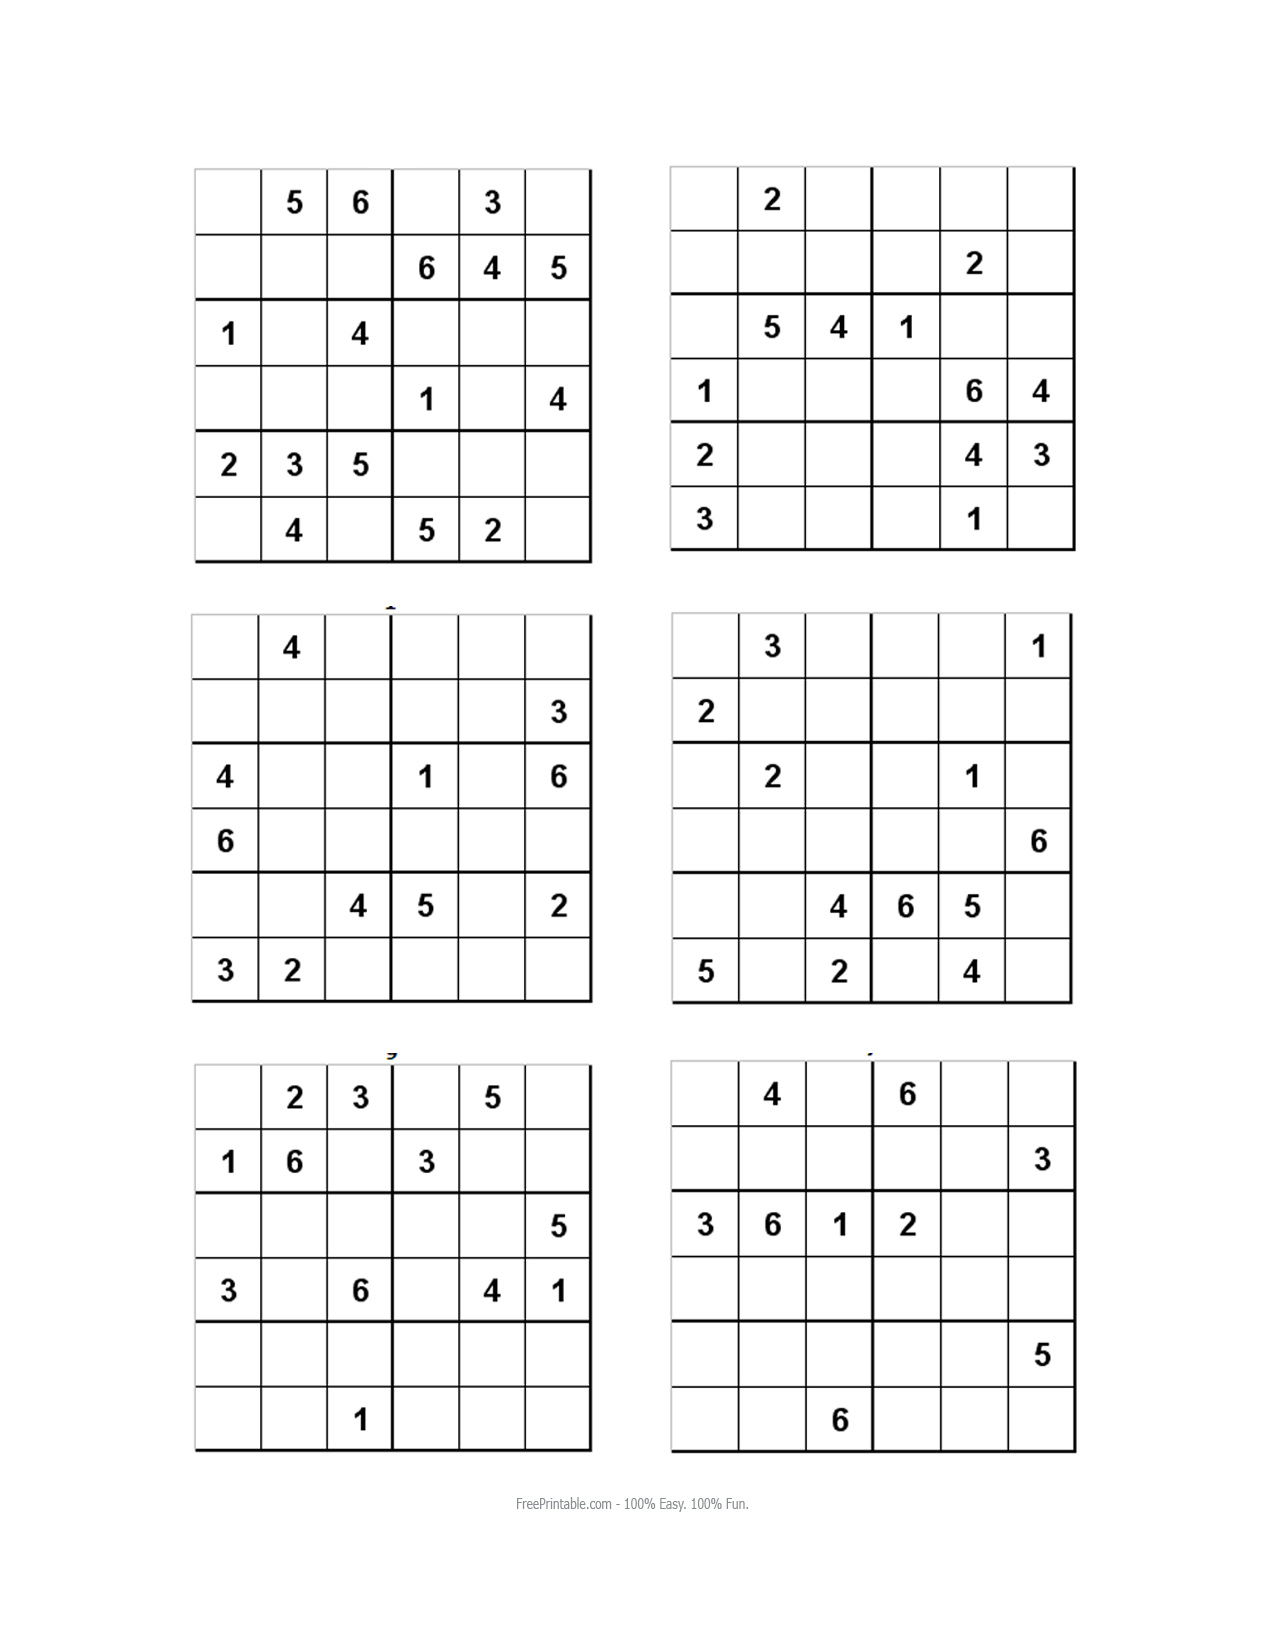 10 Best Photos Of Printable Sudoku For Kids 6 - Easy 6X6 Sudoku - Sudoku Puzzles Printable 6X6